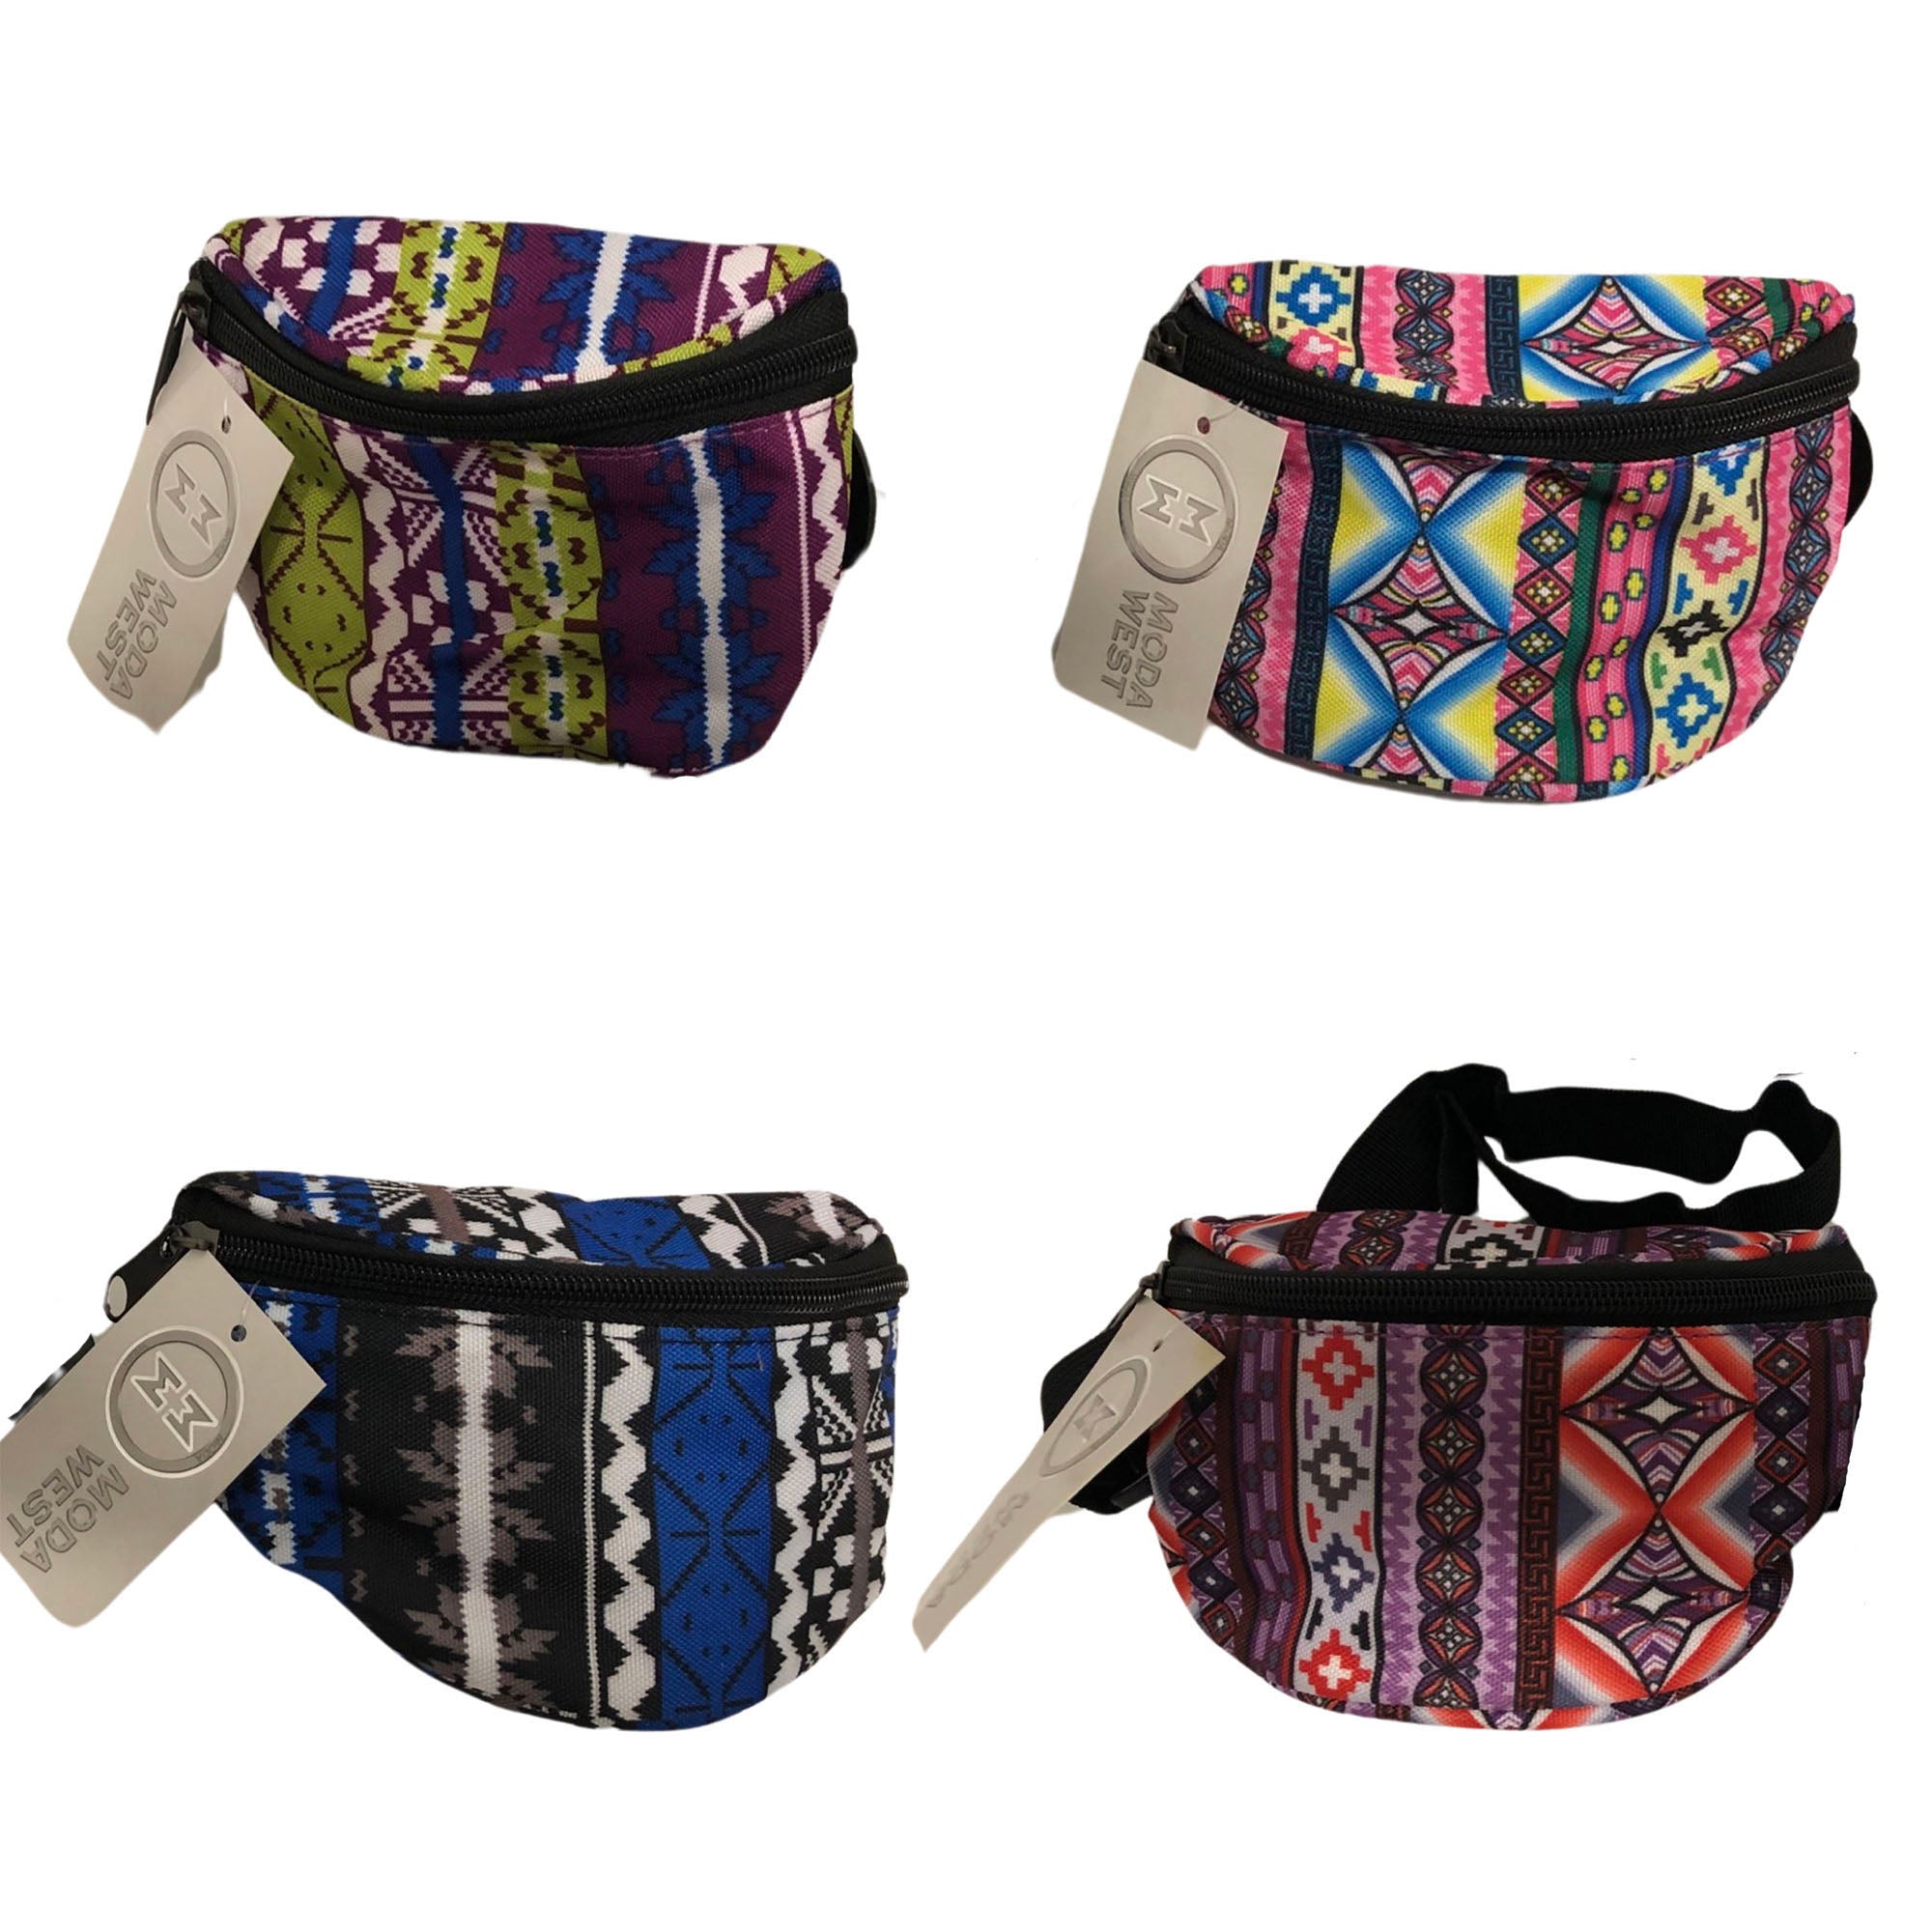 CLEARANCE KIDS FANNY PACKS (CASE OF 60 - $1.25 / PIECE) - Wholesale Children's Fanny Bags in Assorted Prints SKU: WP202-900D-60